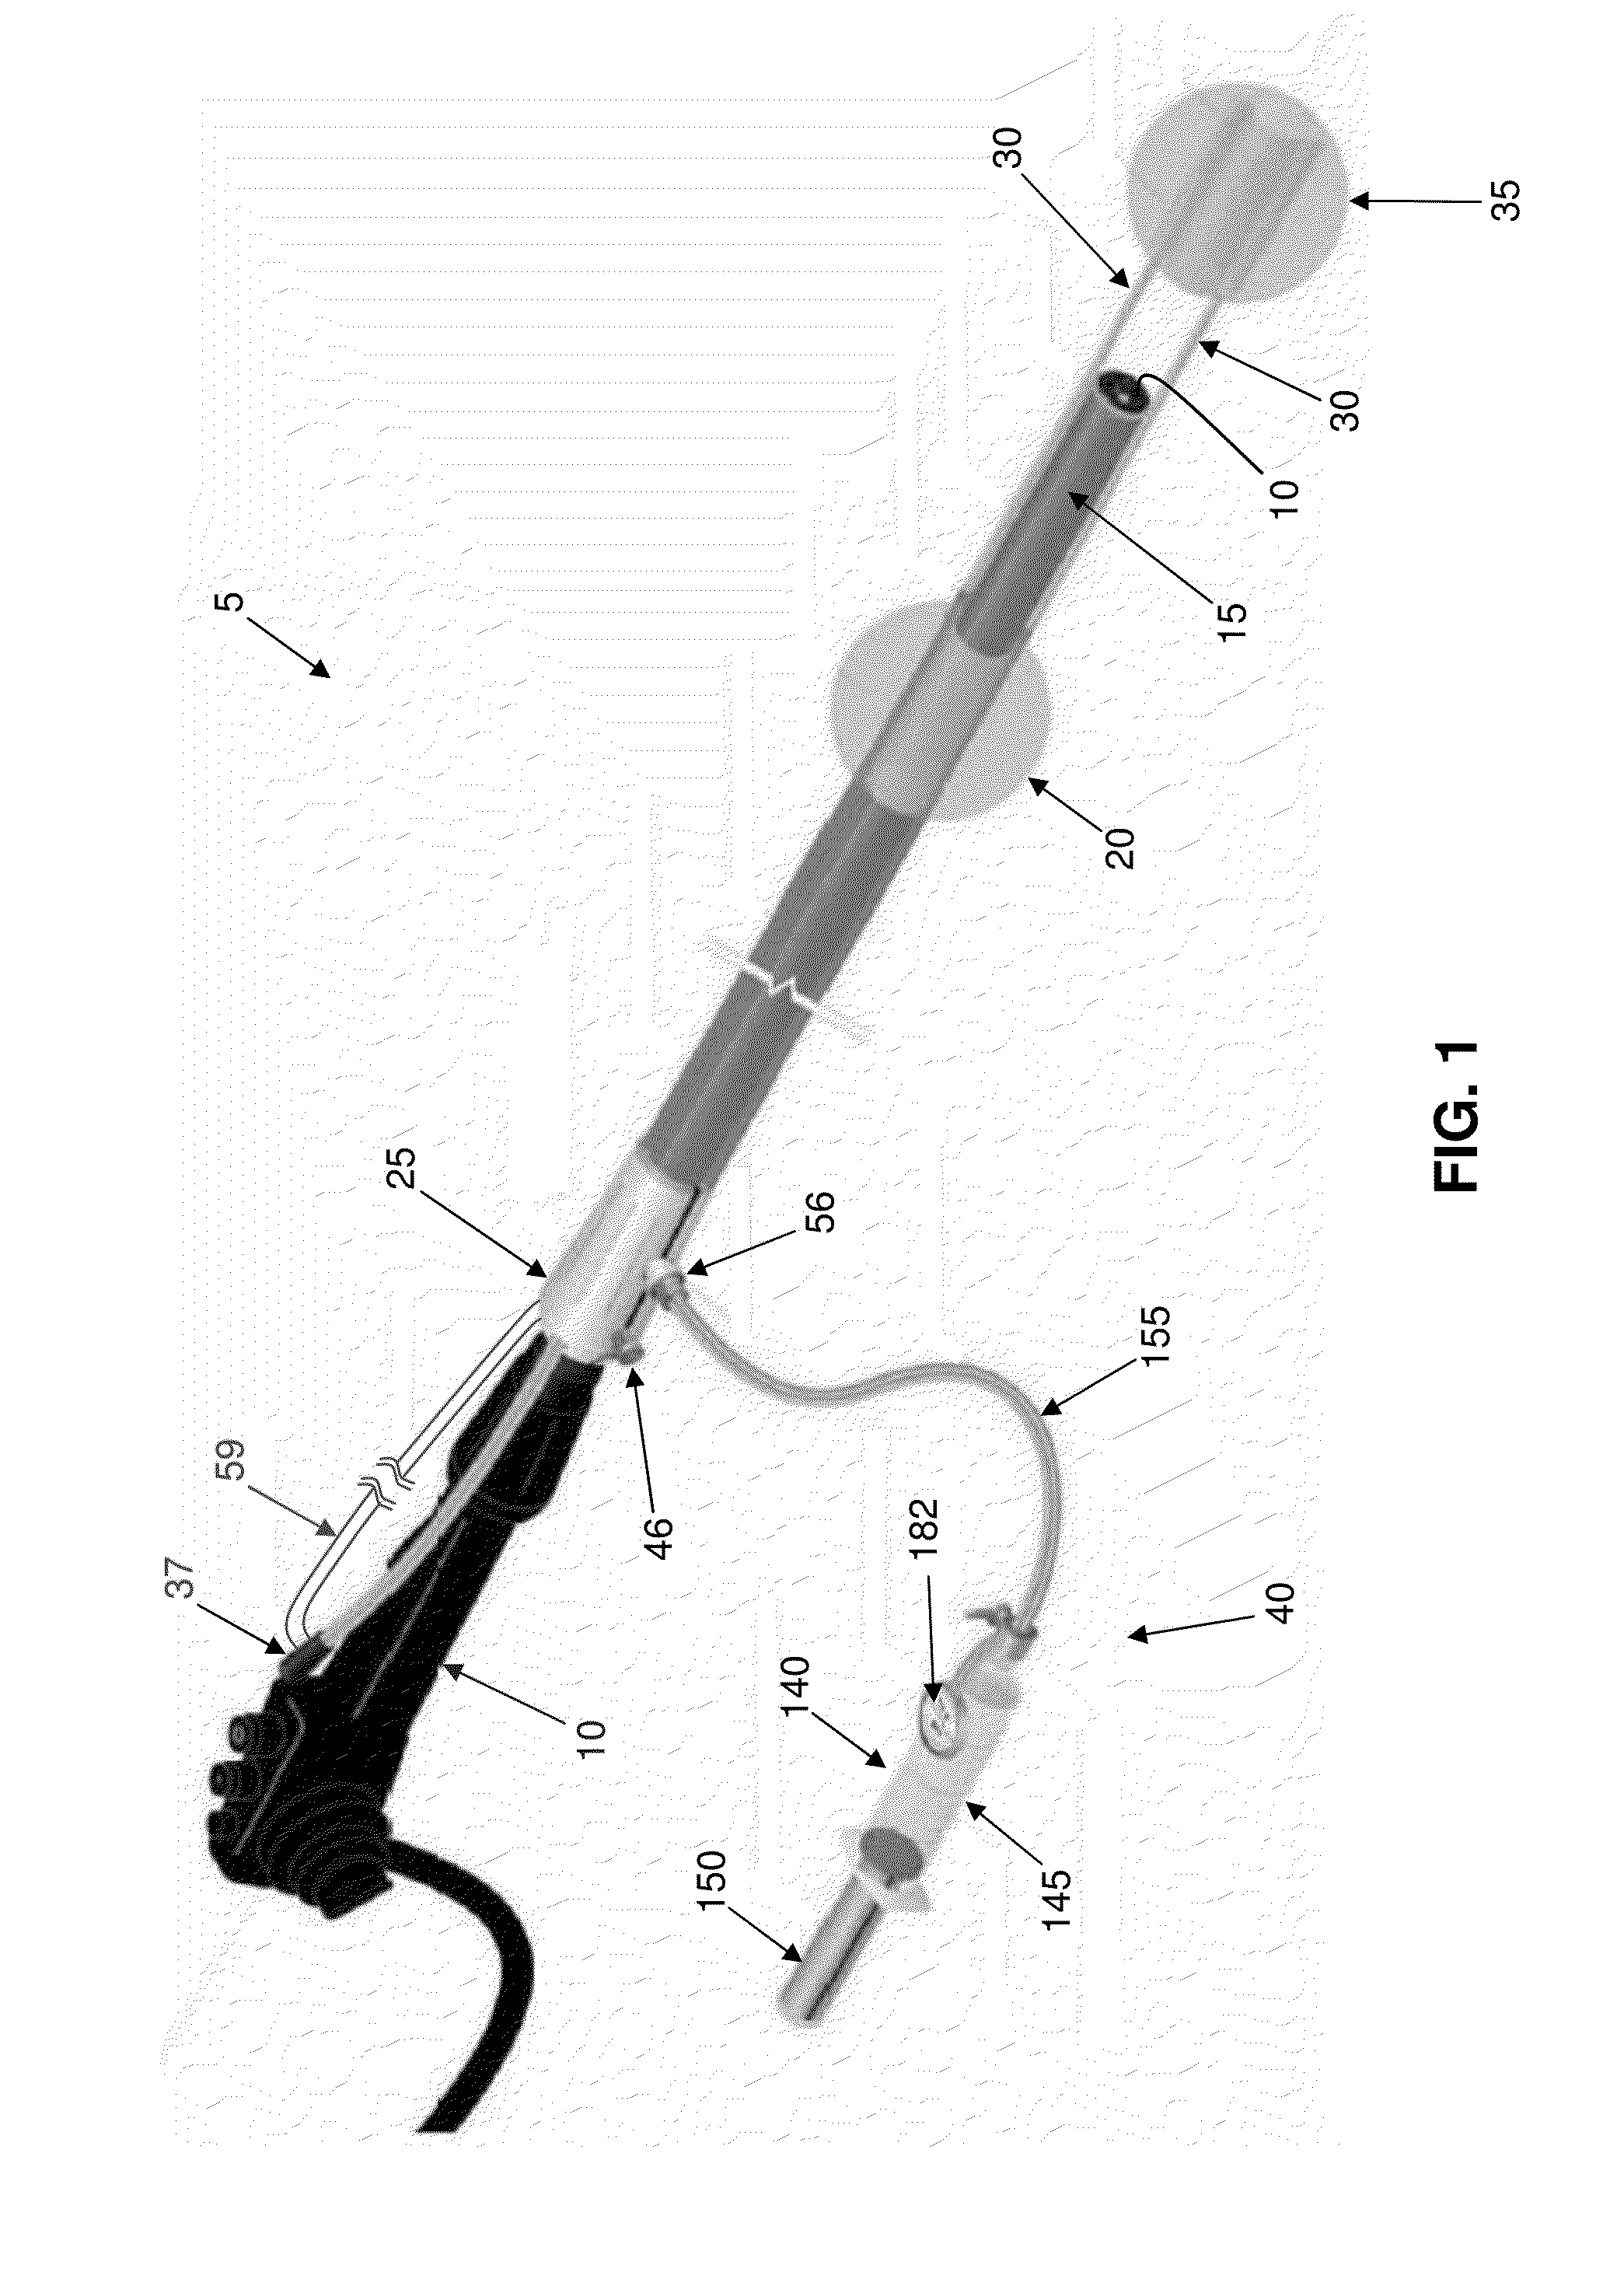 Method and apparatus for manipulating the side wall of a body lumen or body cavity so as to provide increased visualization of the same and/or increased access to the same, and/or for stabilizing instruments relative to the same